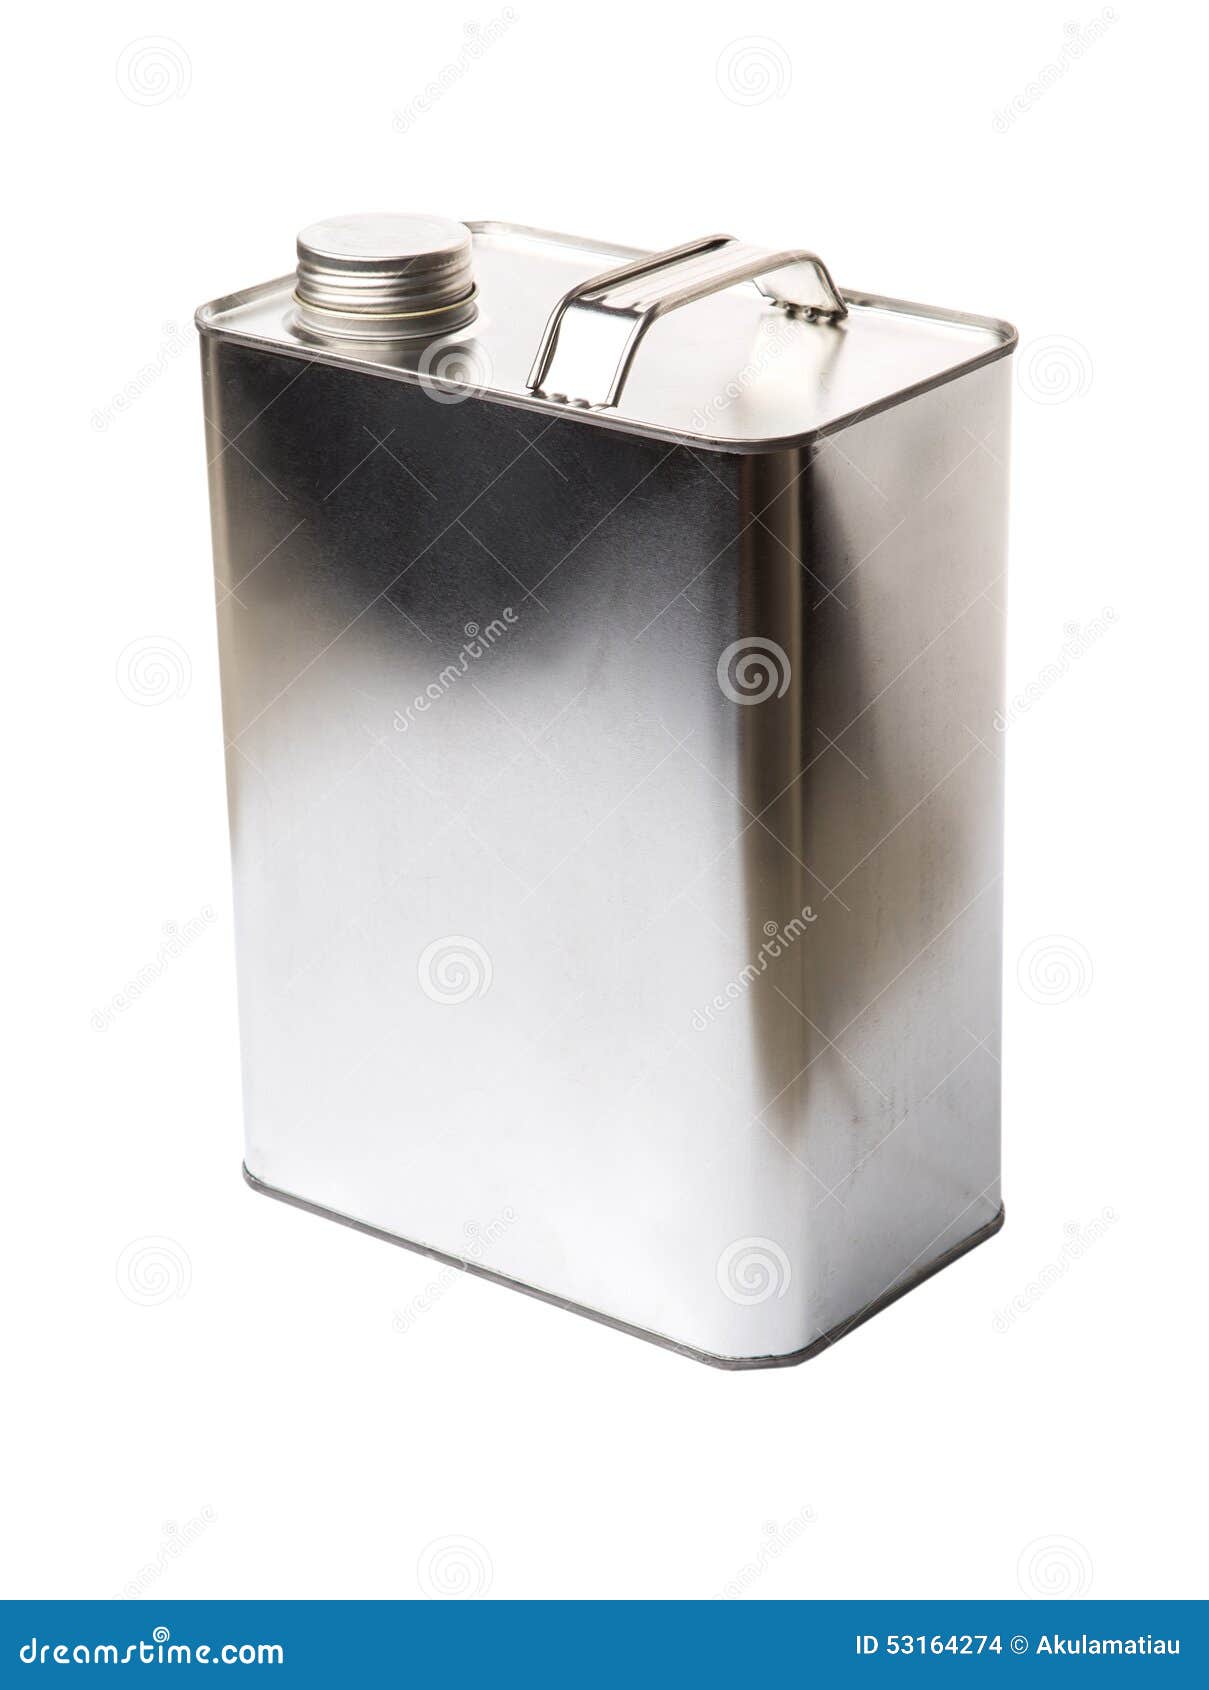 Gasoline Tin Can II stock photo. Image of white, product - 53164274